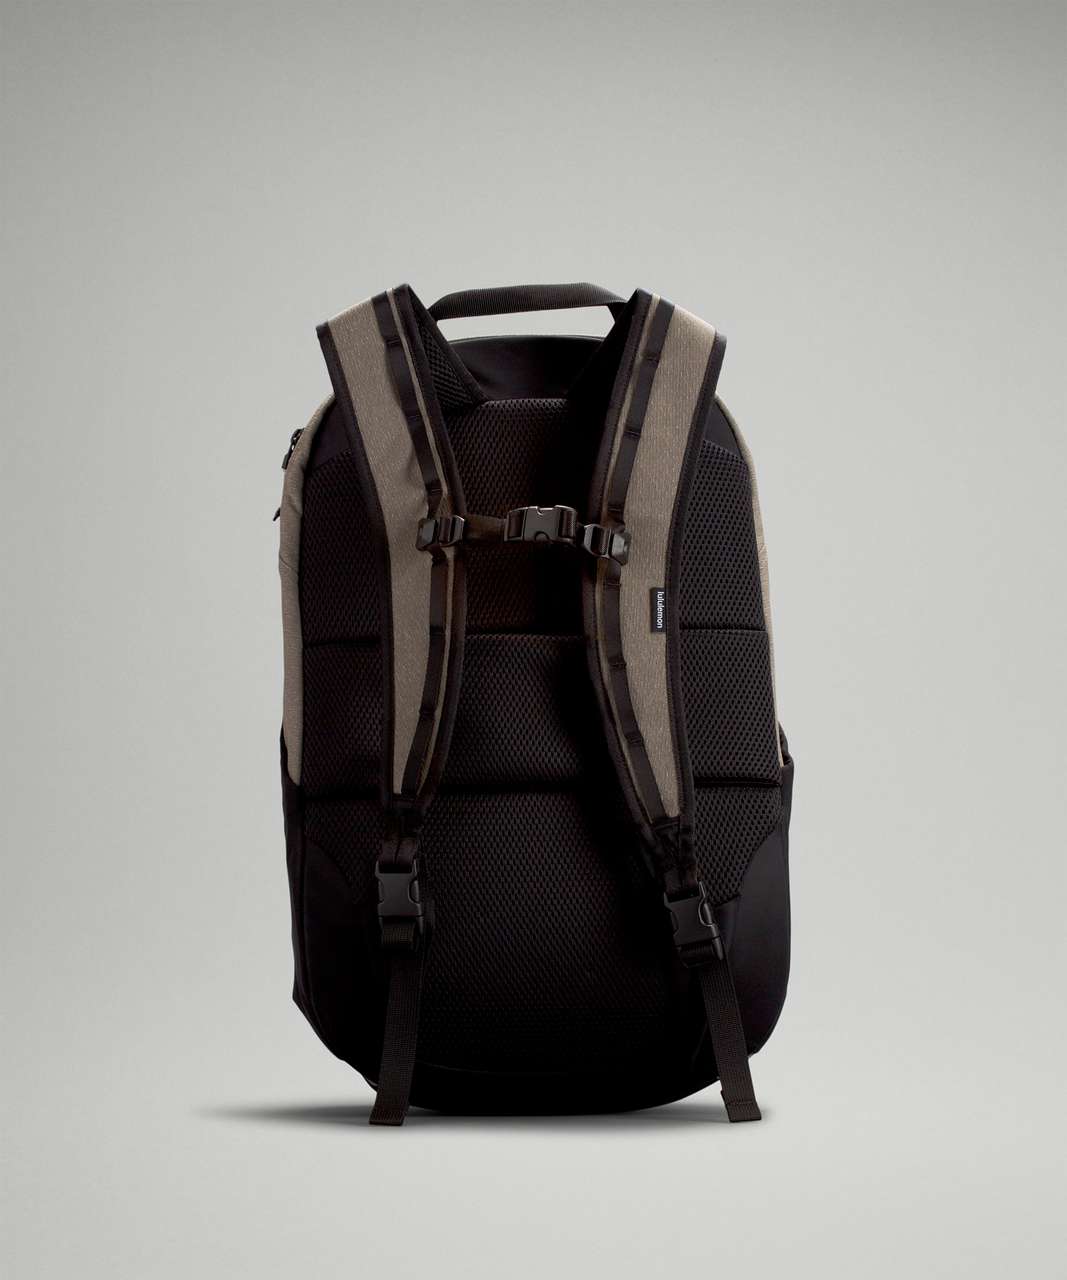 Lululemon Core Backpack 2.0 20L - Heathered Rover